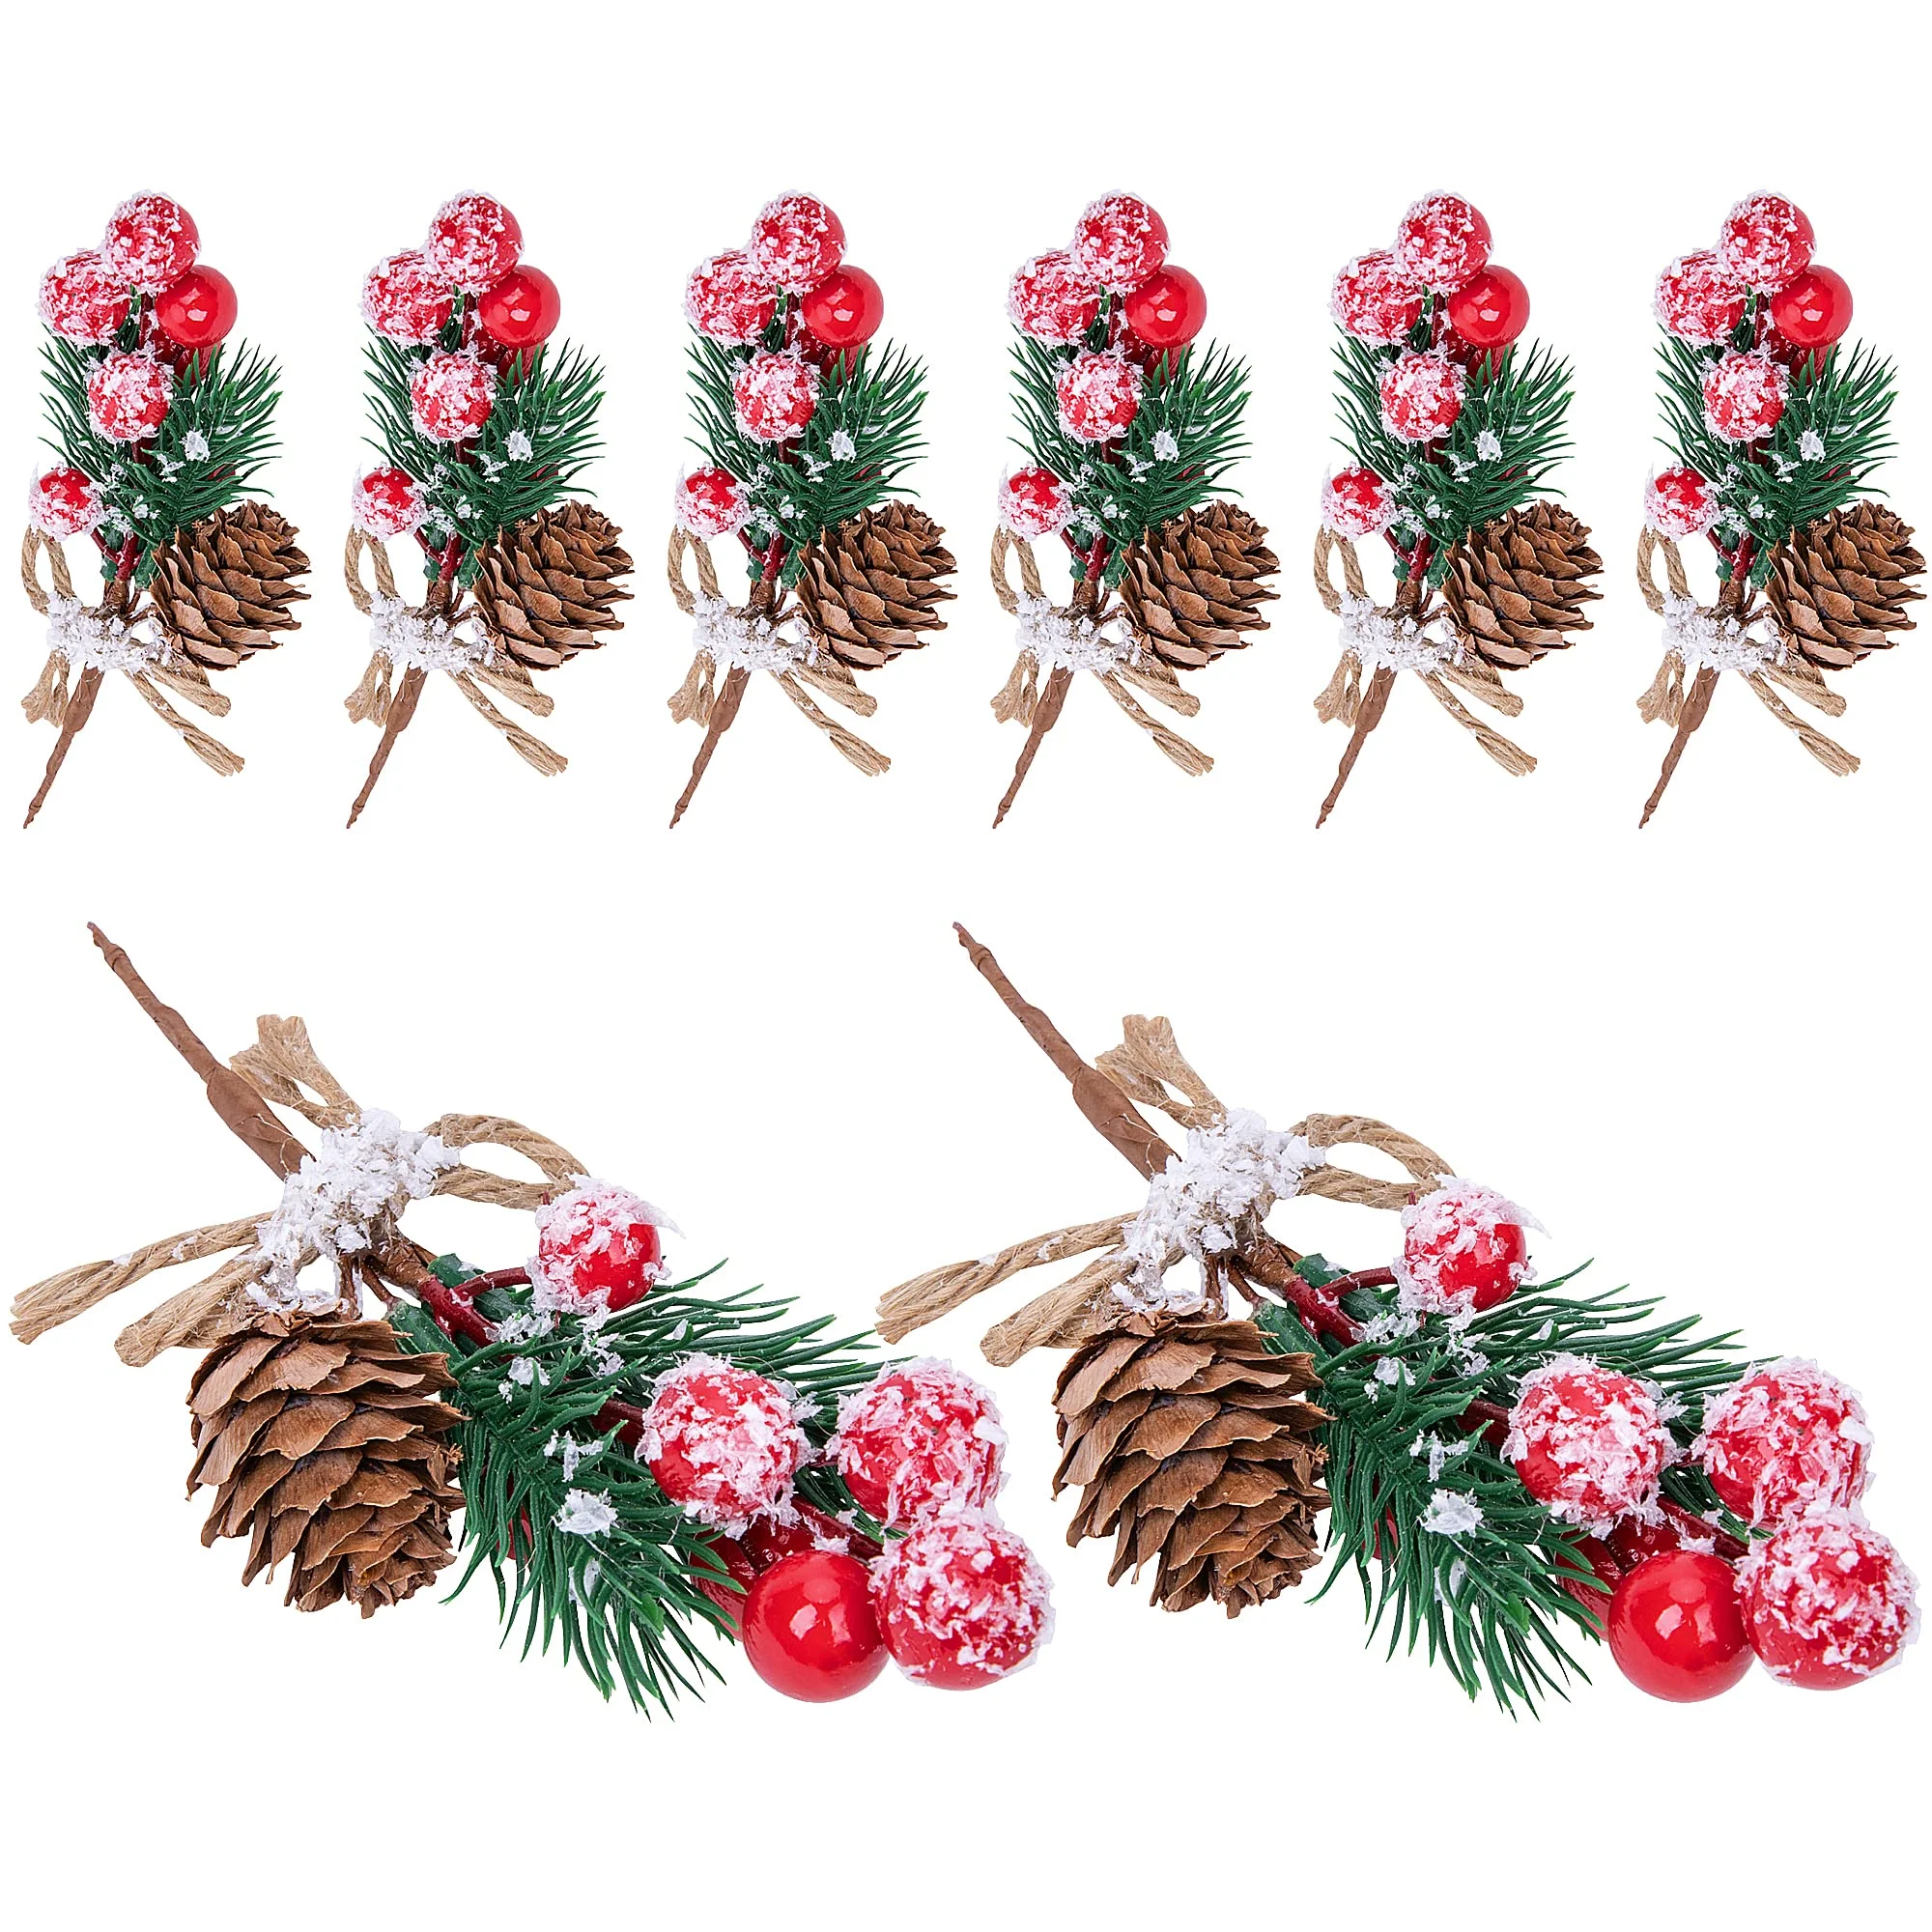 

5Pcs Christmas Red Berry Articifial Flower Pine Cone Branch Christmas Tree Decorations Ornament Gift Packaging Home DIY Wreath